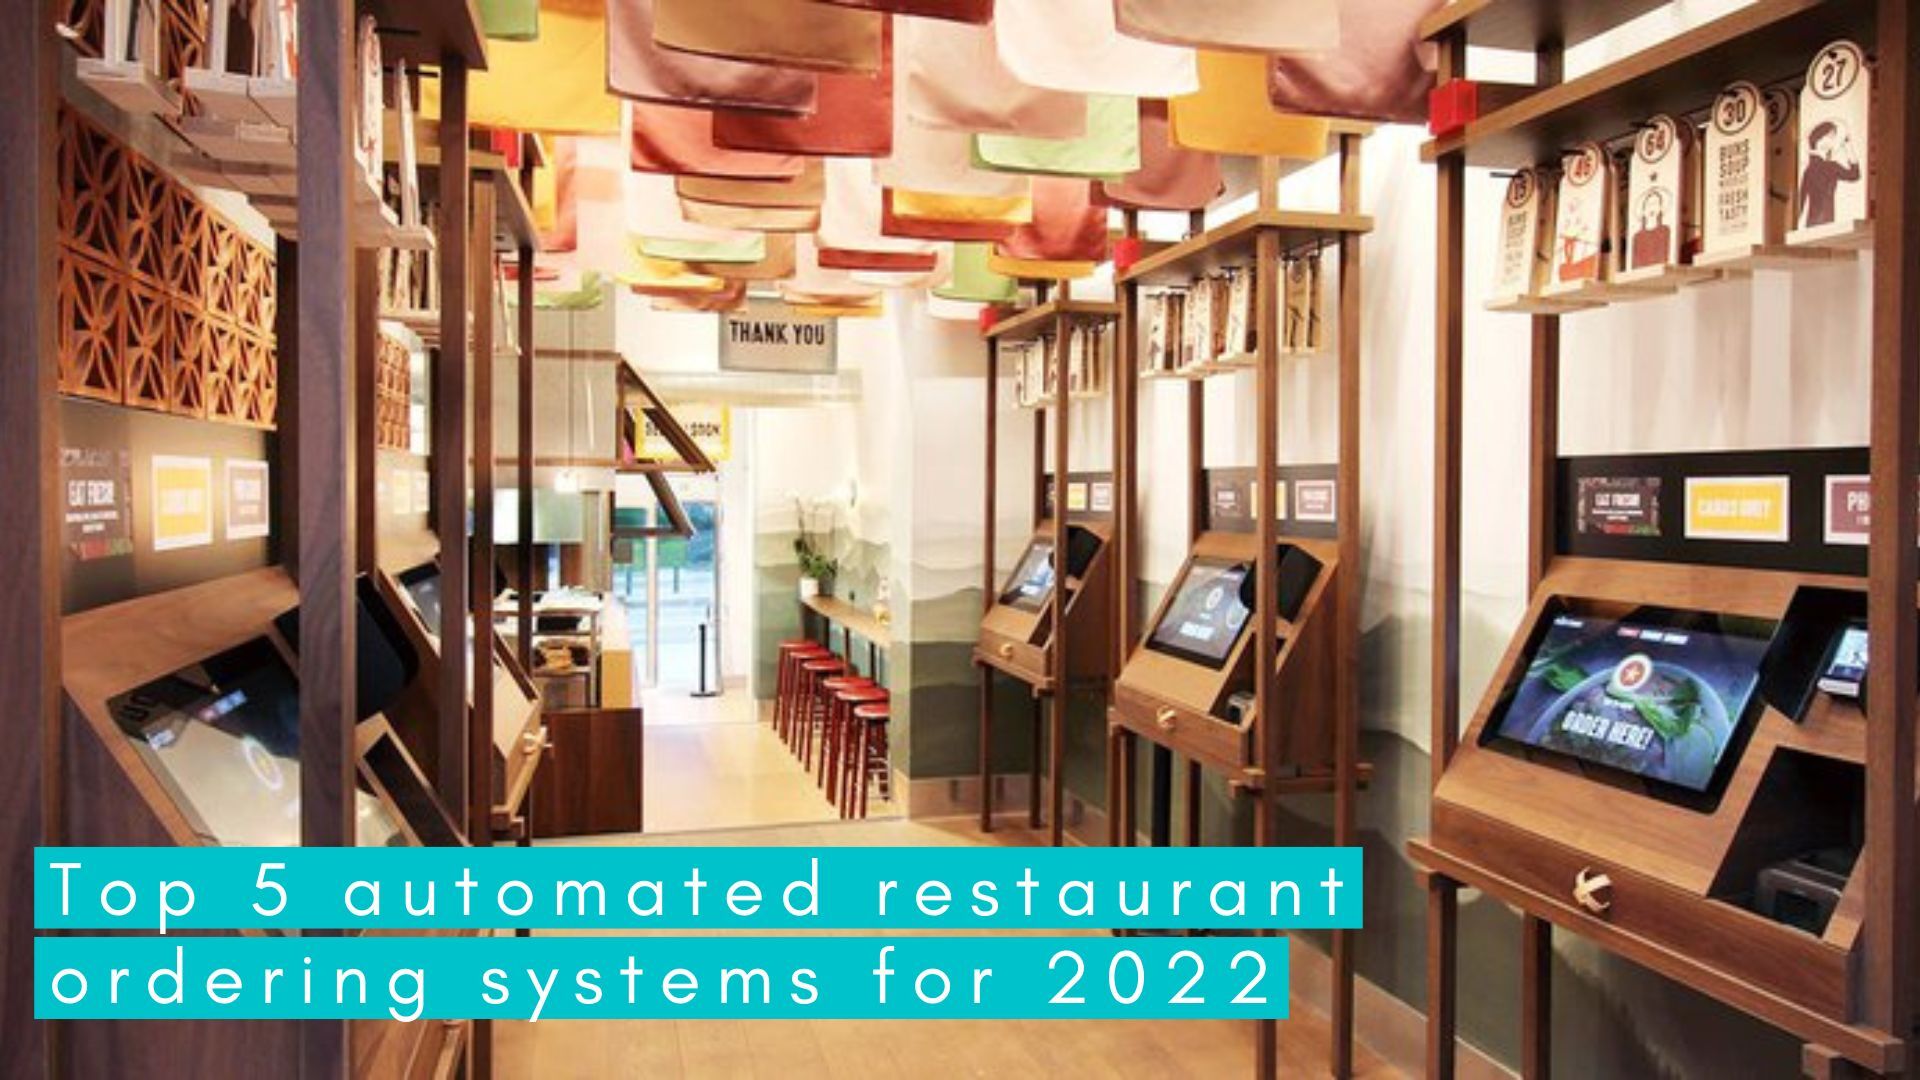 You are currently viewing Top 5 Automated Restaurant Ordering Systems for 2022